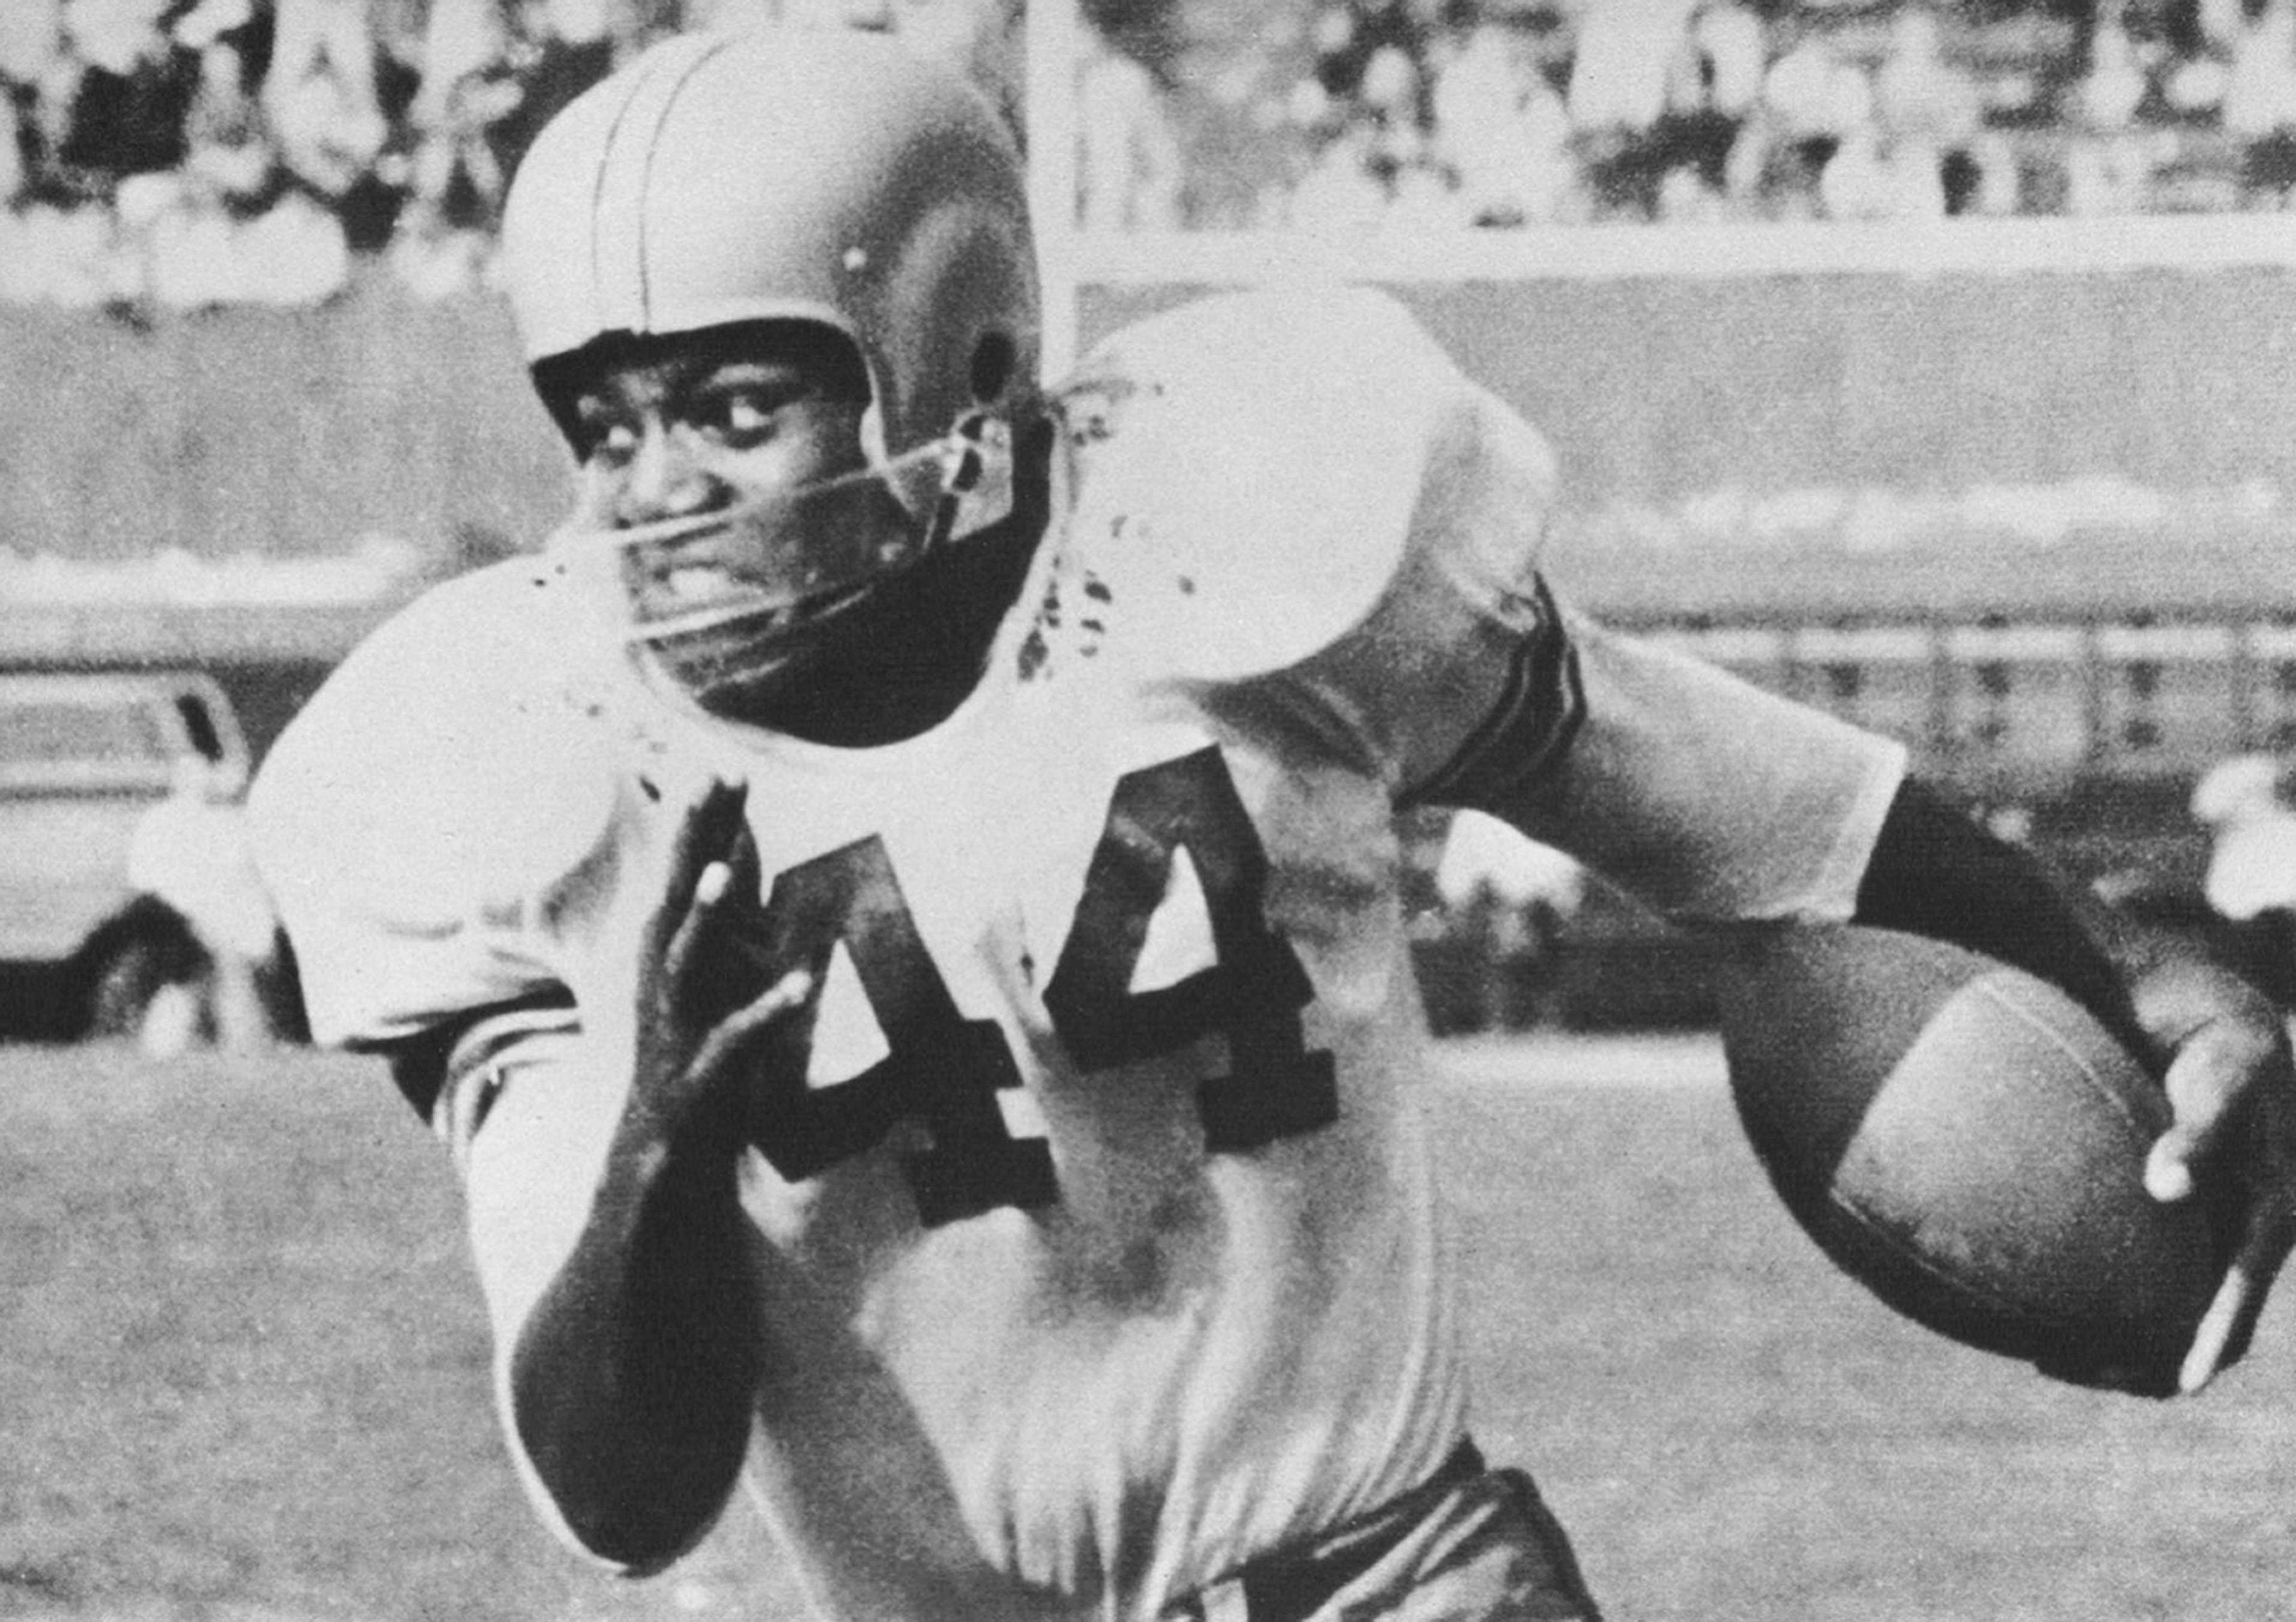 NFL's best at every offensive position: Jim Brown the GOAT at RB - ESPN